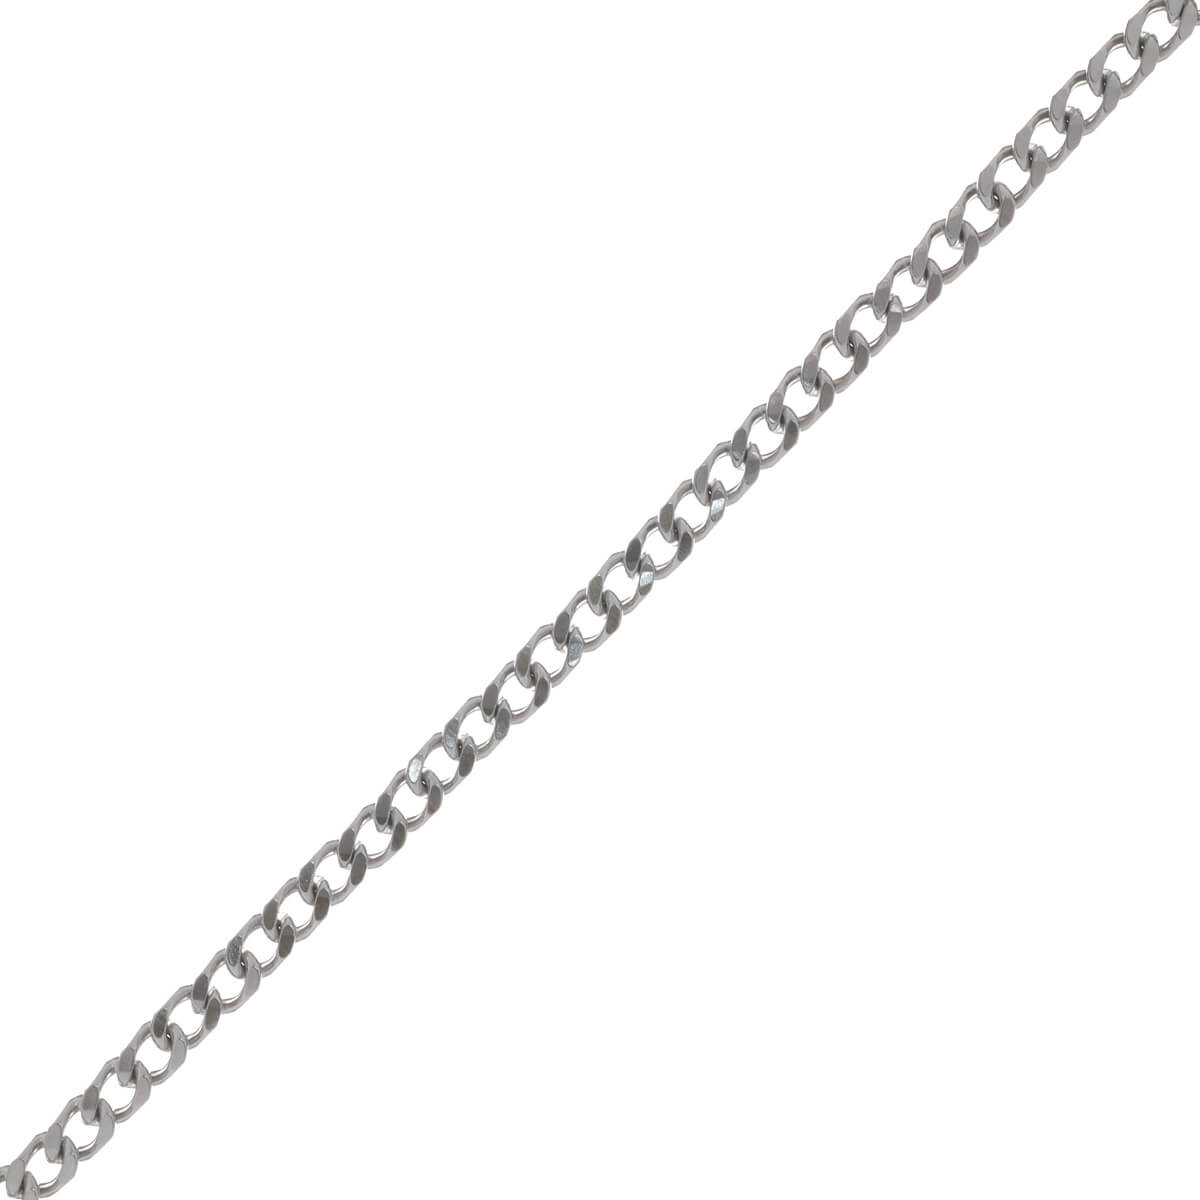 Steel armor chain necklace 55cm